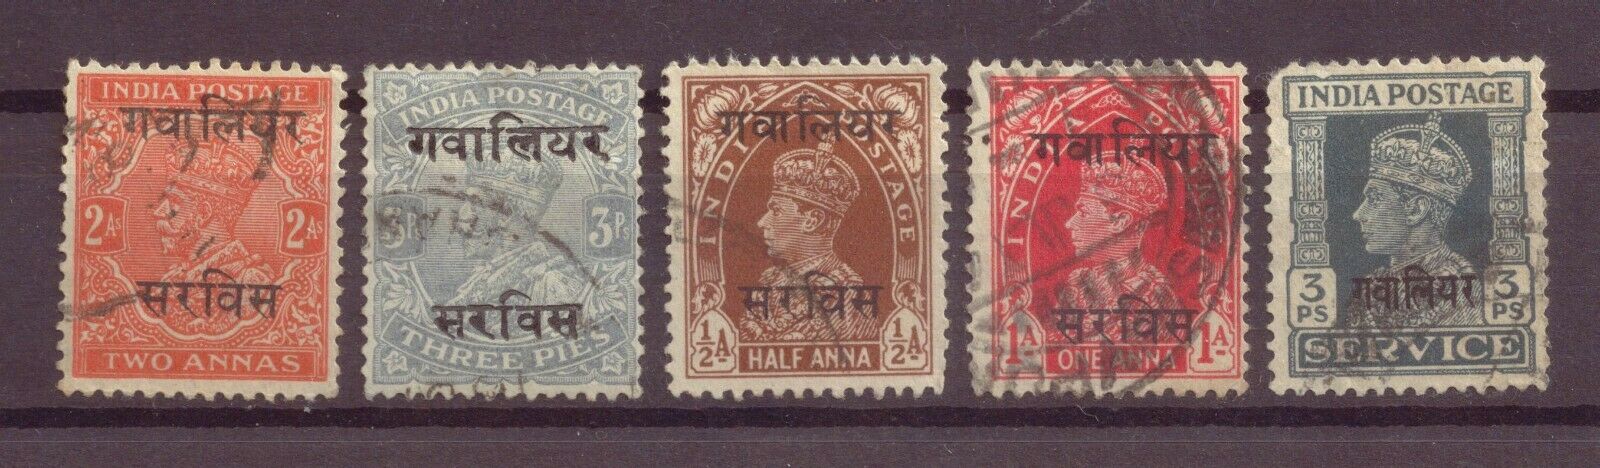 India, Gwalior Provence, Kings George V, VI, Used, 1920s, 1930s, OLD